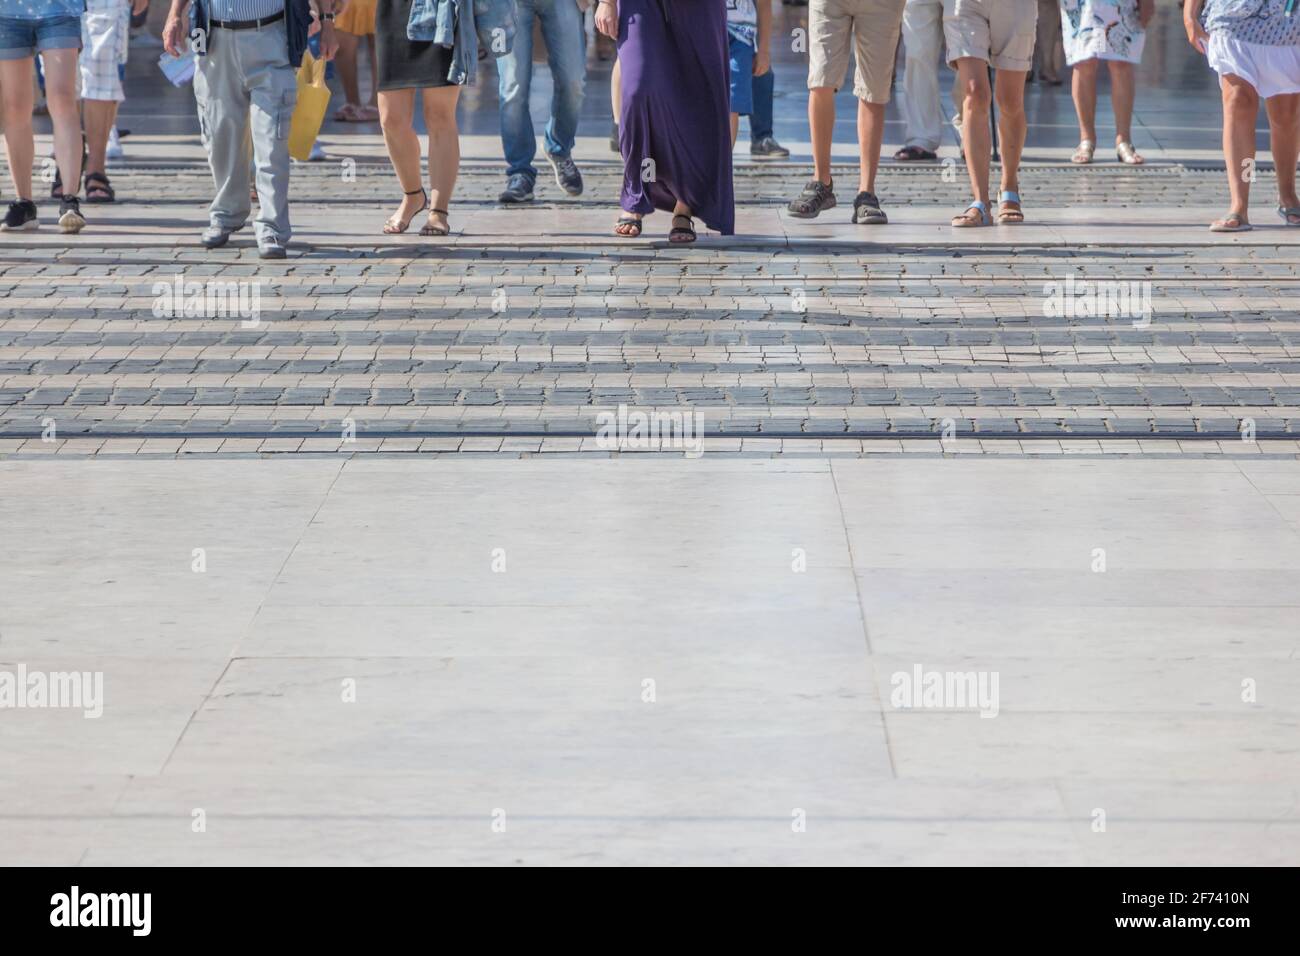 Large pedestrian crossing city crowd walk in motion on road. Many legs,  feet and shoes from different people walking on town street crosswalk in  hurry Stock Photo - Alamy